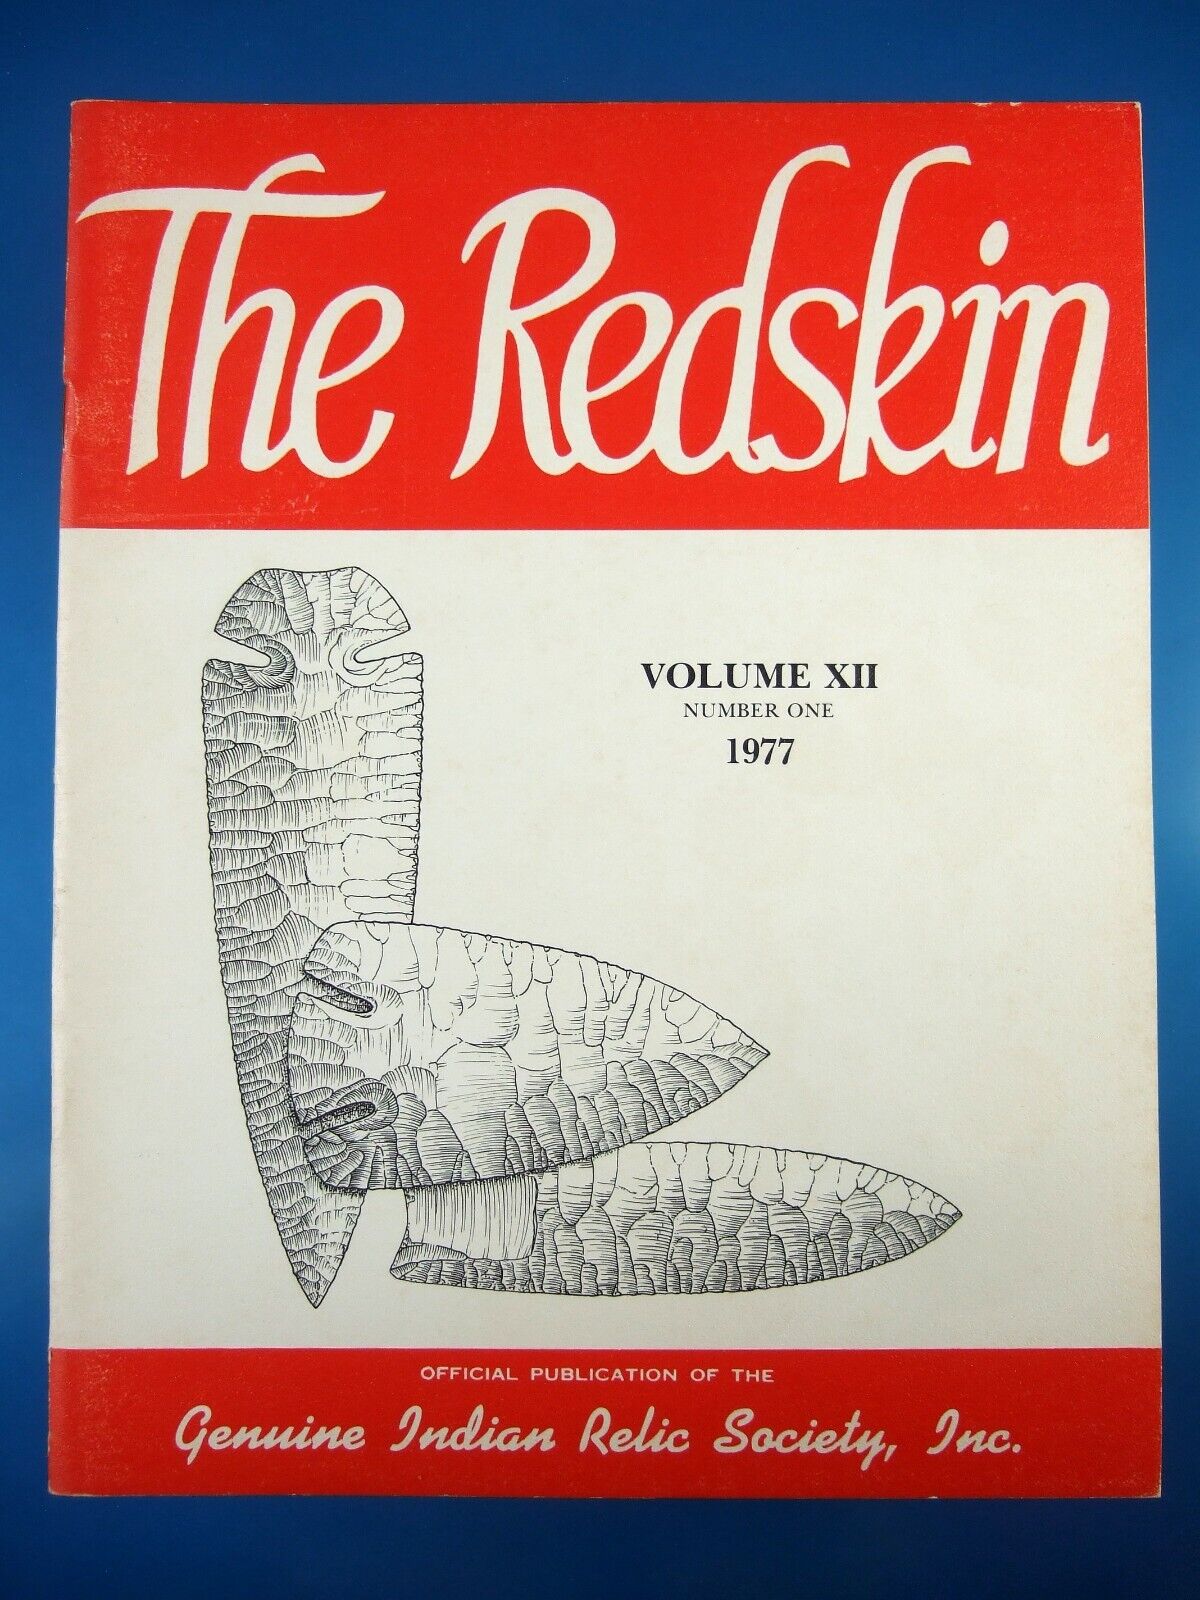 The Redskin Publication 1977 Volume XII Indian Arrowheads Artifacts